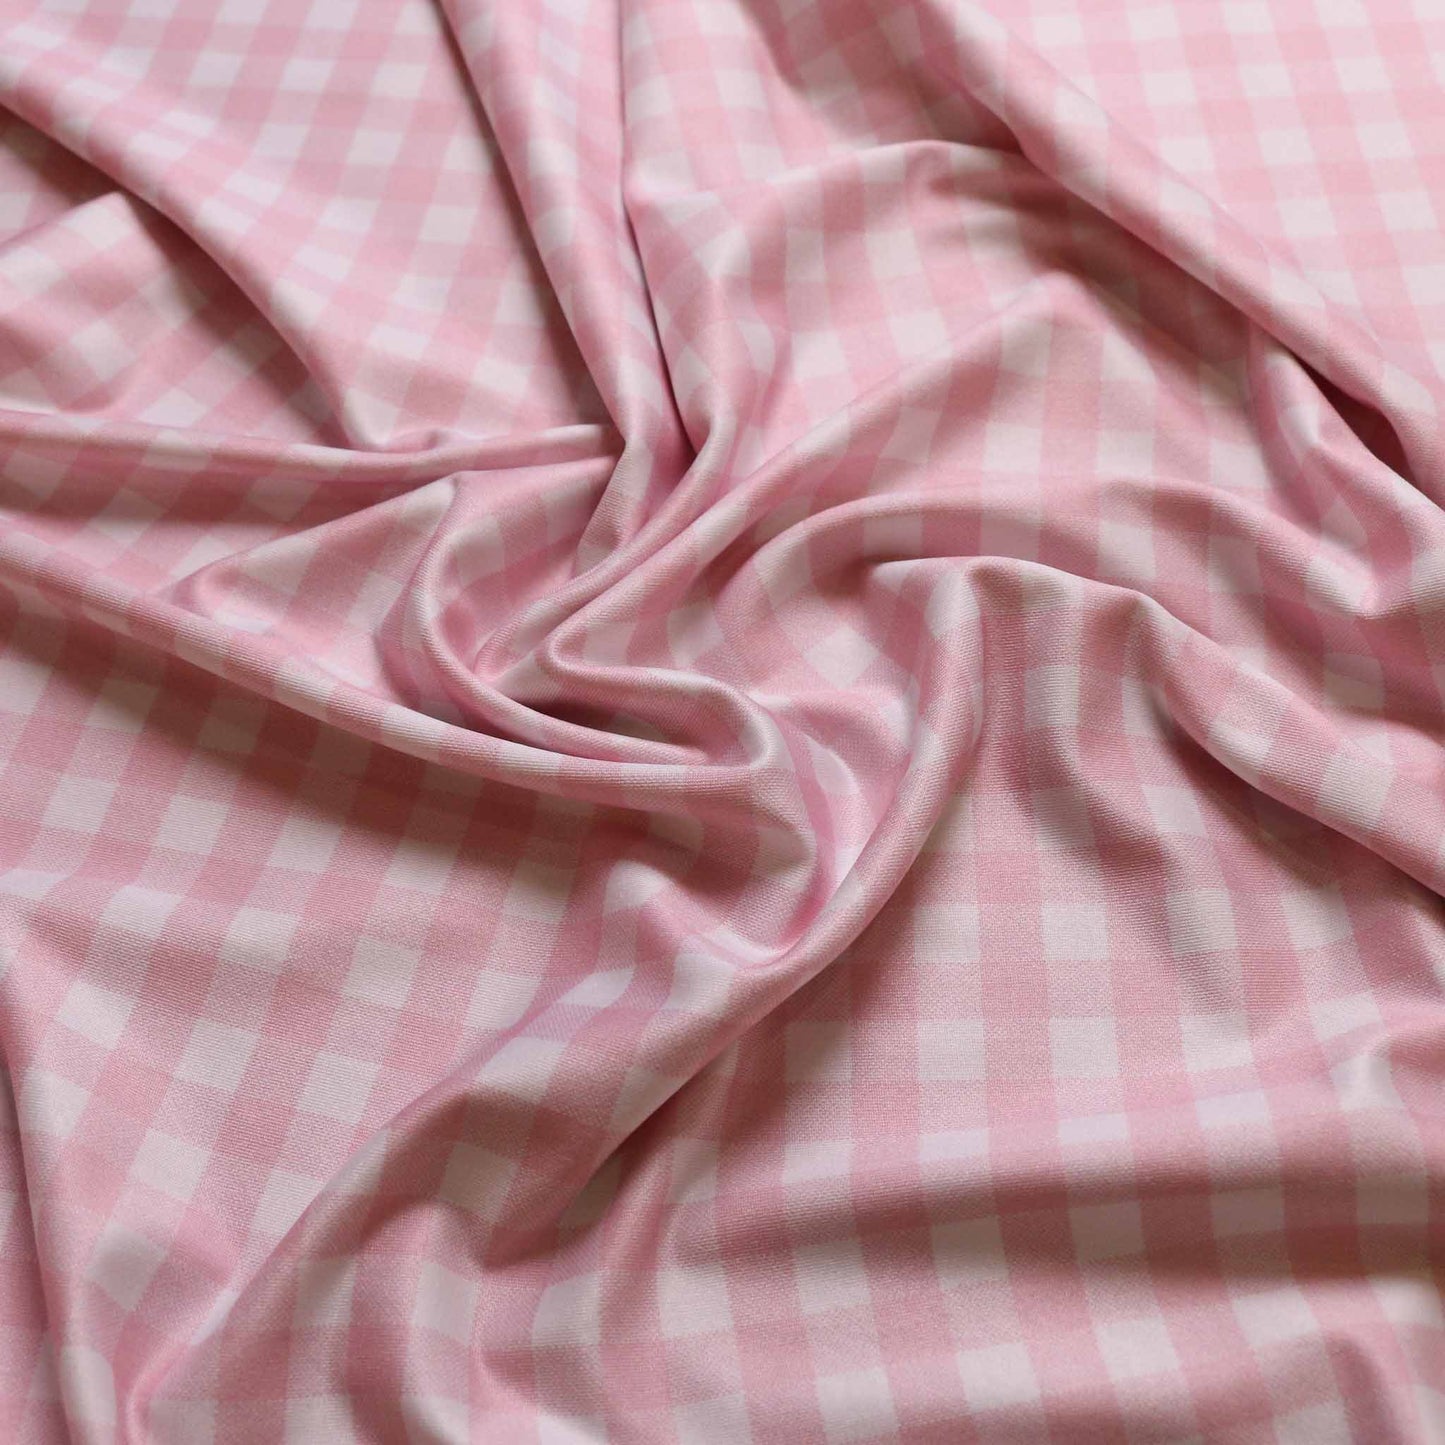 folded dressmaking lycra jersey fabric with white and pink gingham print design